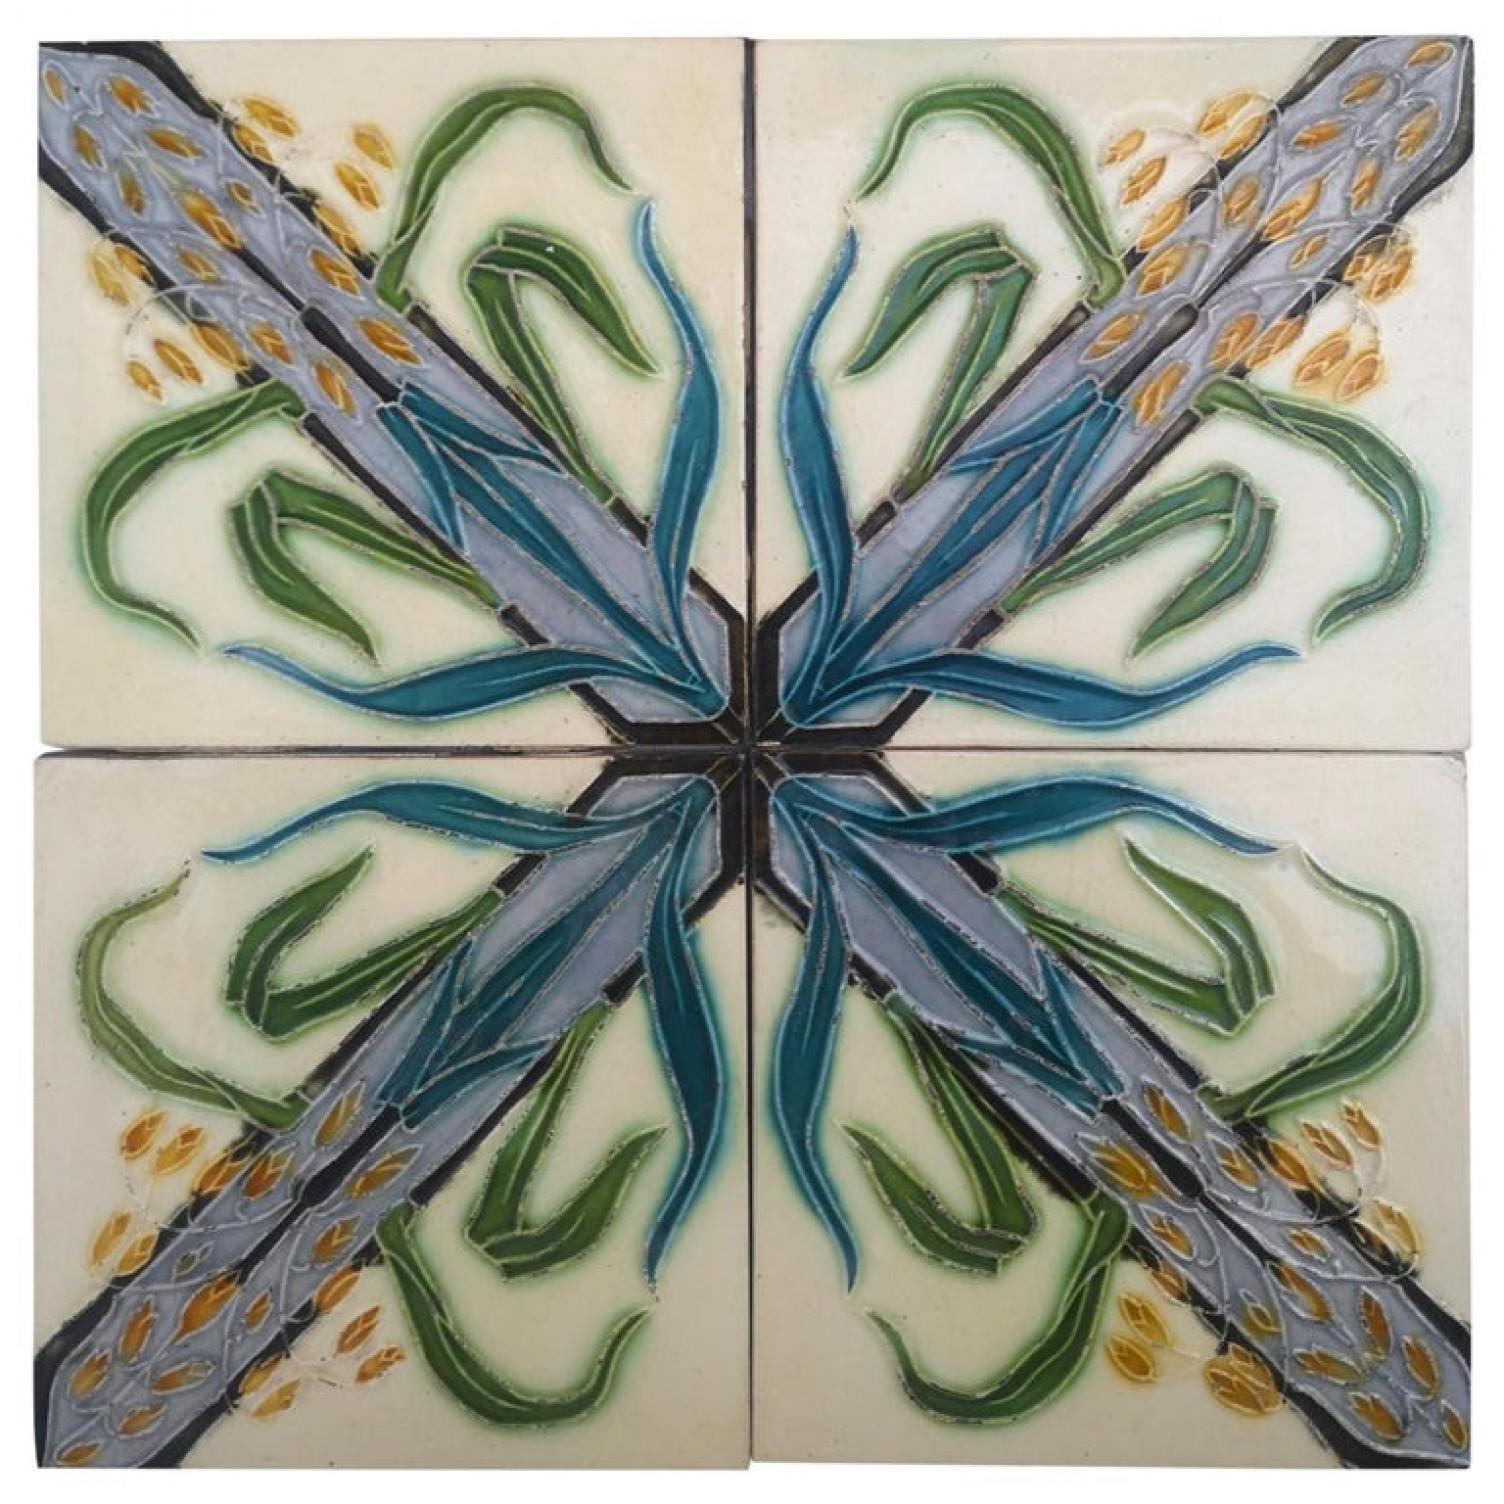 11 of the 30 sets of 4 f unique antique tiles, with a beautiful Art Deco pattern manufactured around 1930 by Céramiques d 'Hemixem, Gilliot Frères, circa 1940, Belgium.

The dimensions per tile are Size each tile: 6 inches (15.2 cm) width x 6 inches